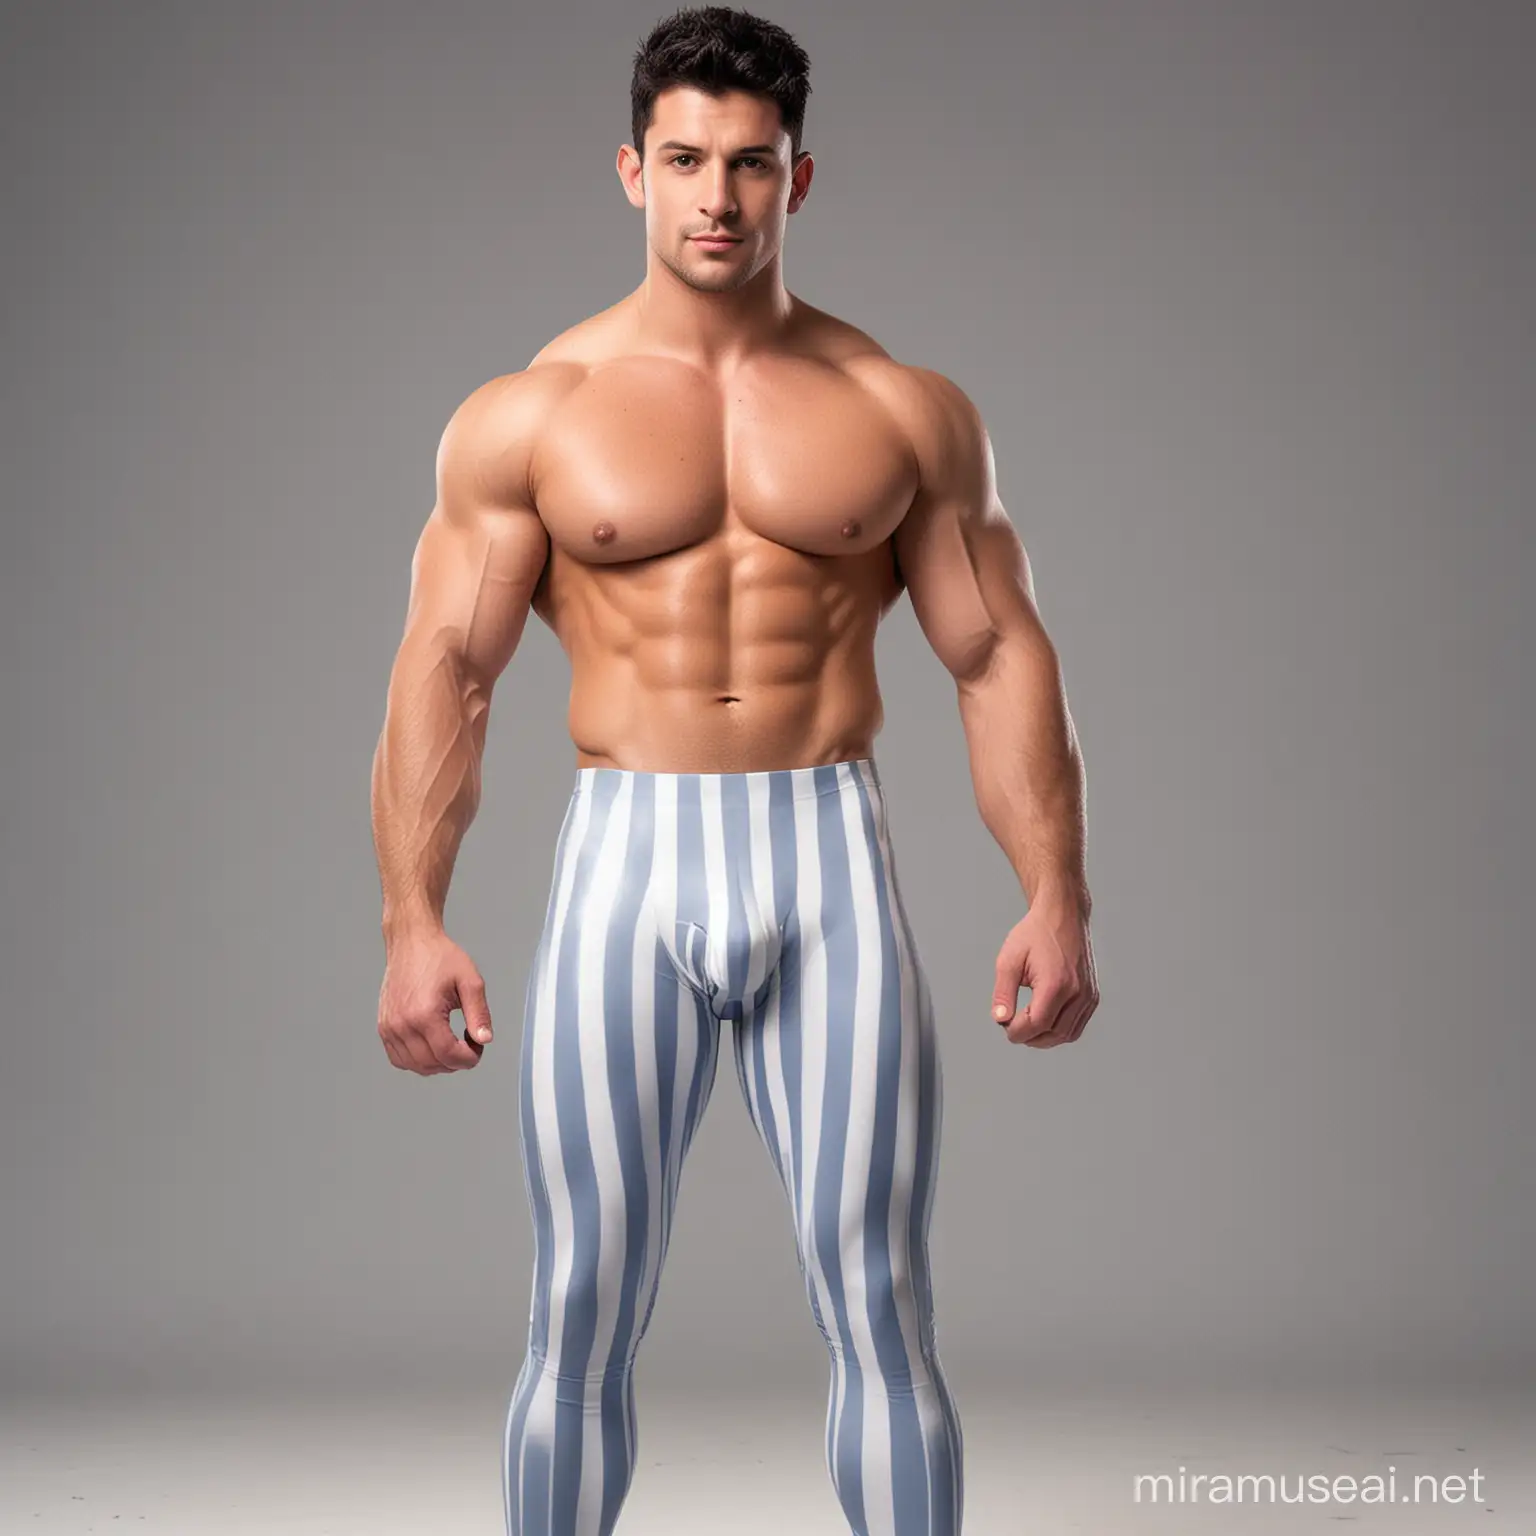 Charming shirtless muscular 28 year old male Argentine wrestler, with short black hair, slight tanned skin and grey eyes, wearing  long periwinkle spandex leggings (with vertical white stripes), well defined buttocks, rear view, in cartoon network style.